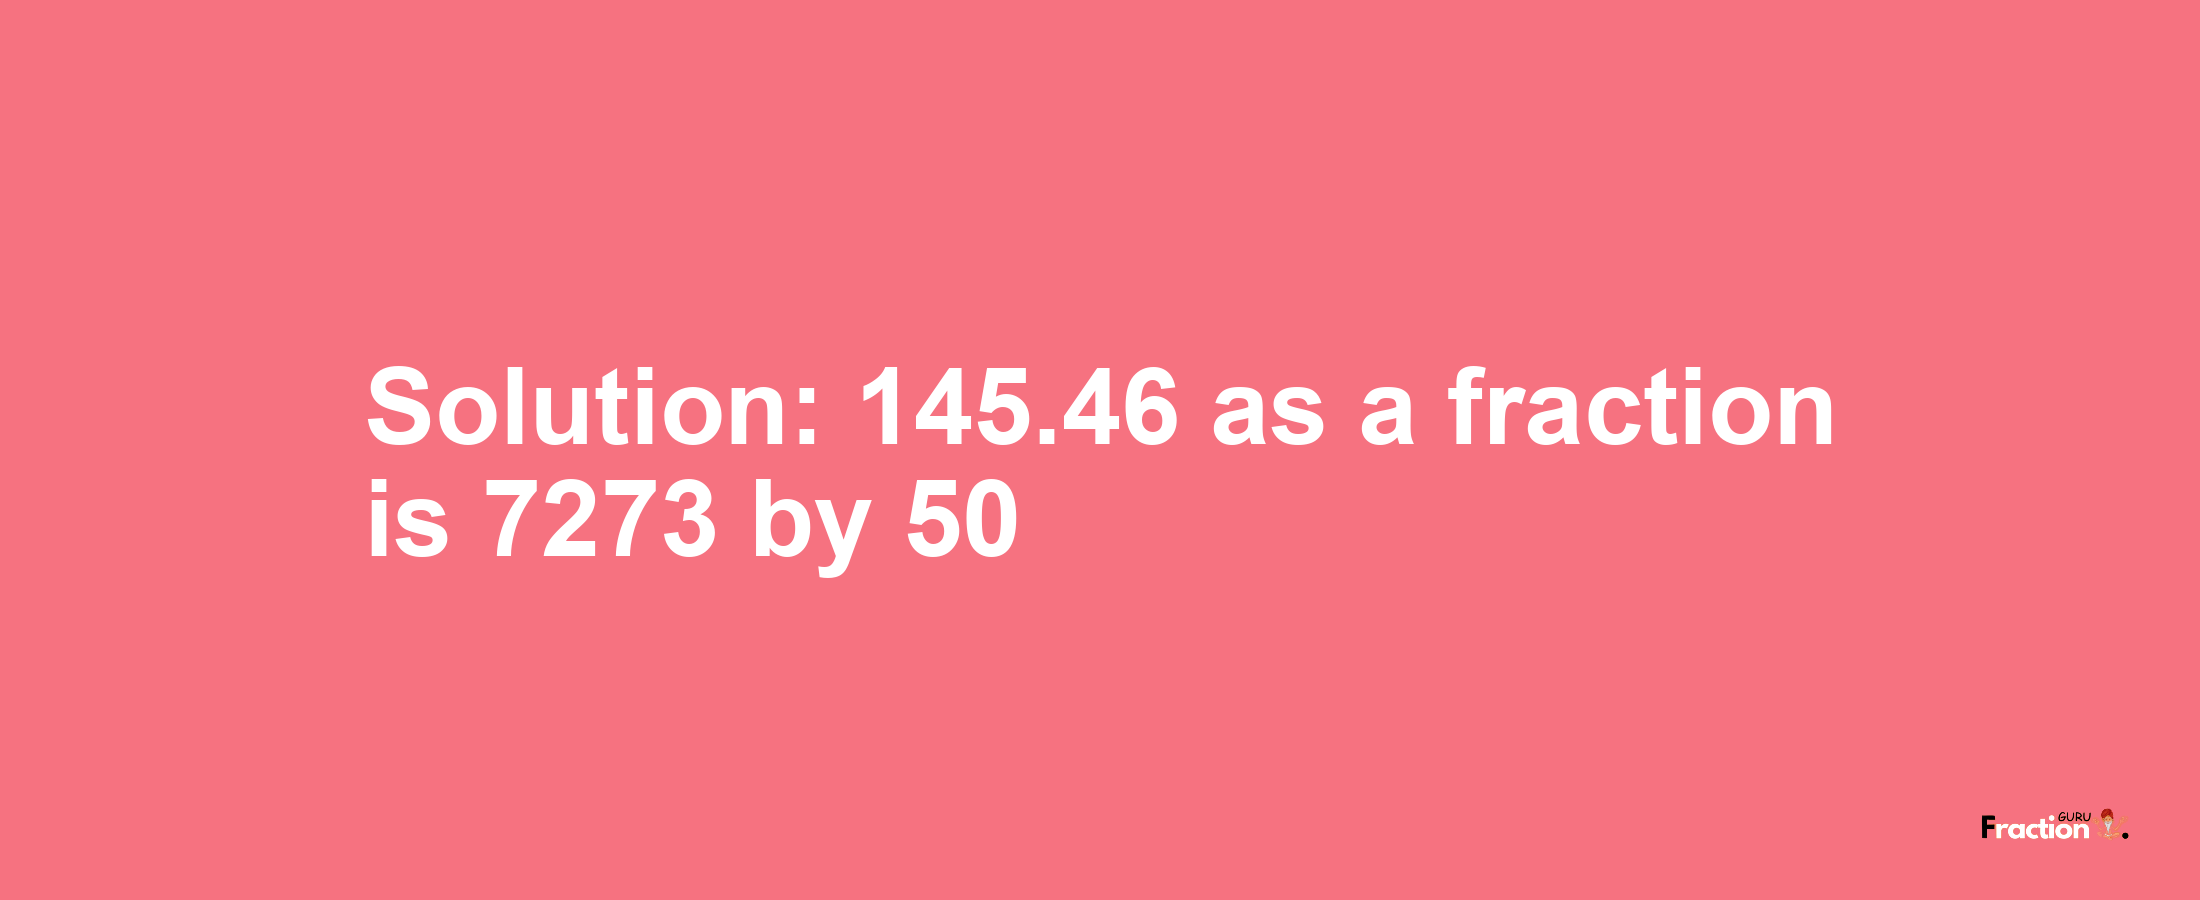 Solution:145.46 as a fraction is 7273/50